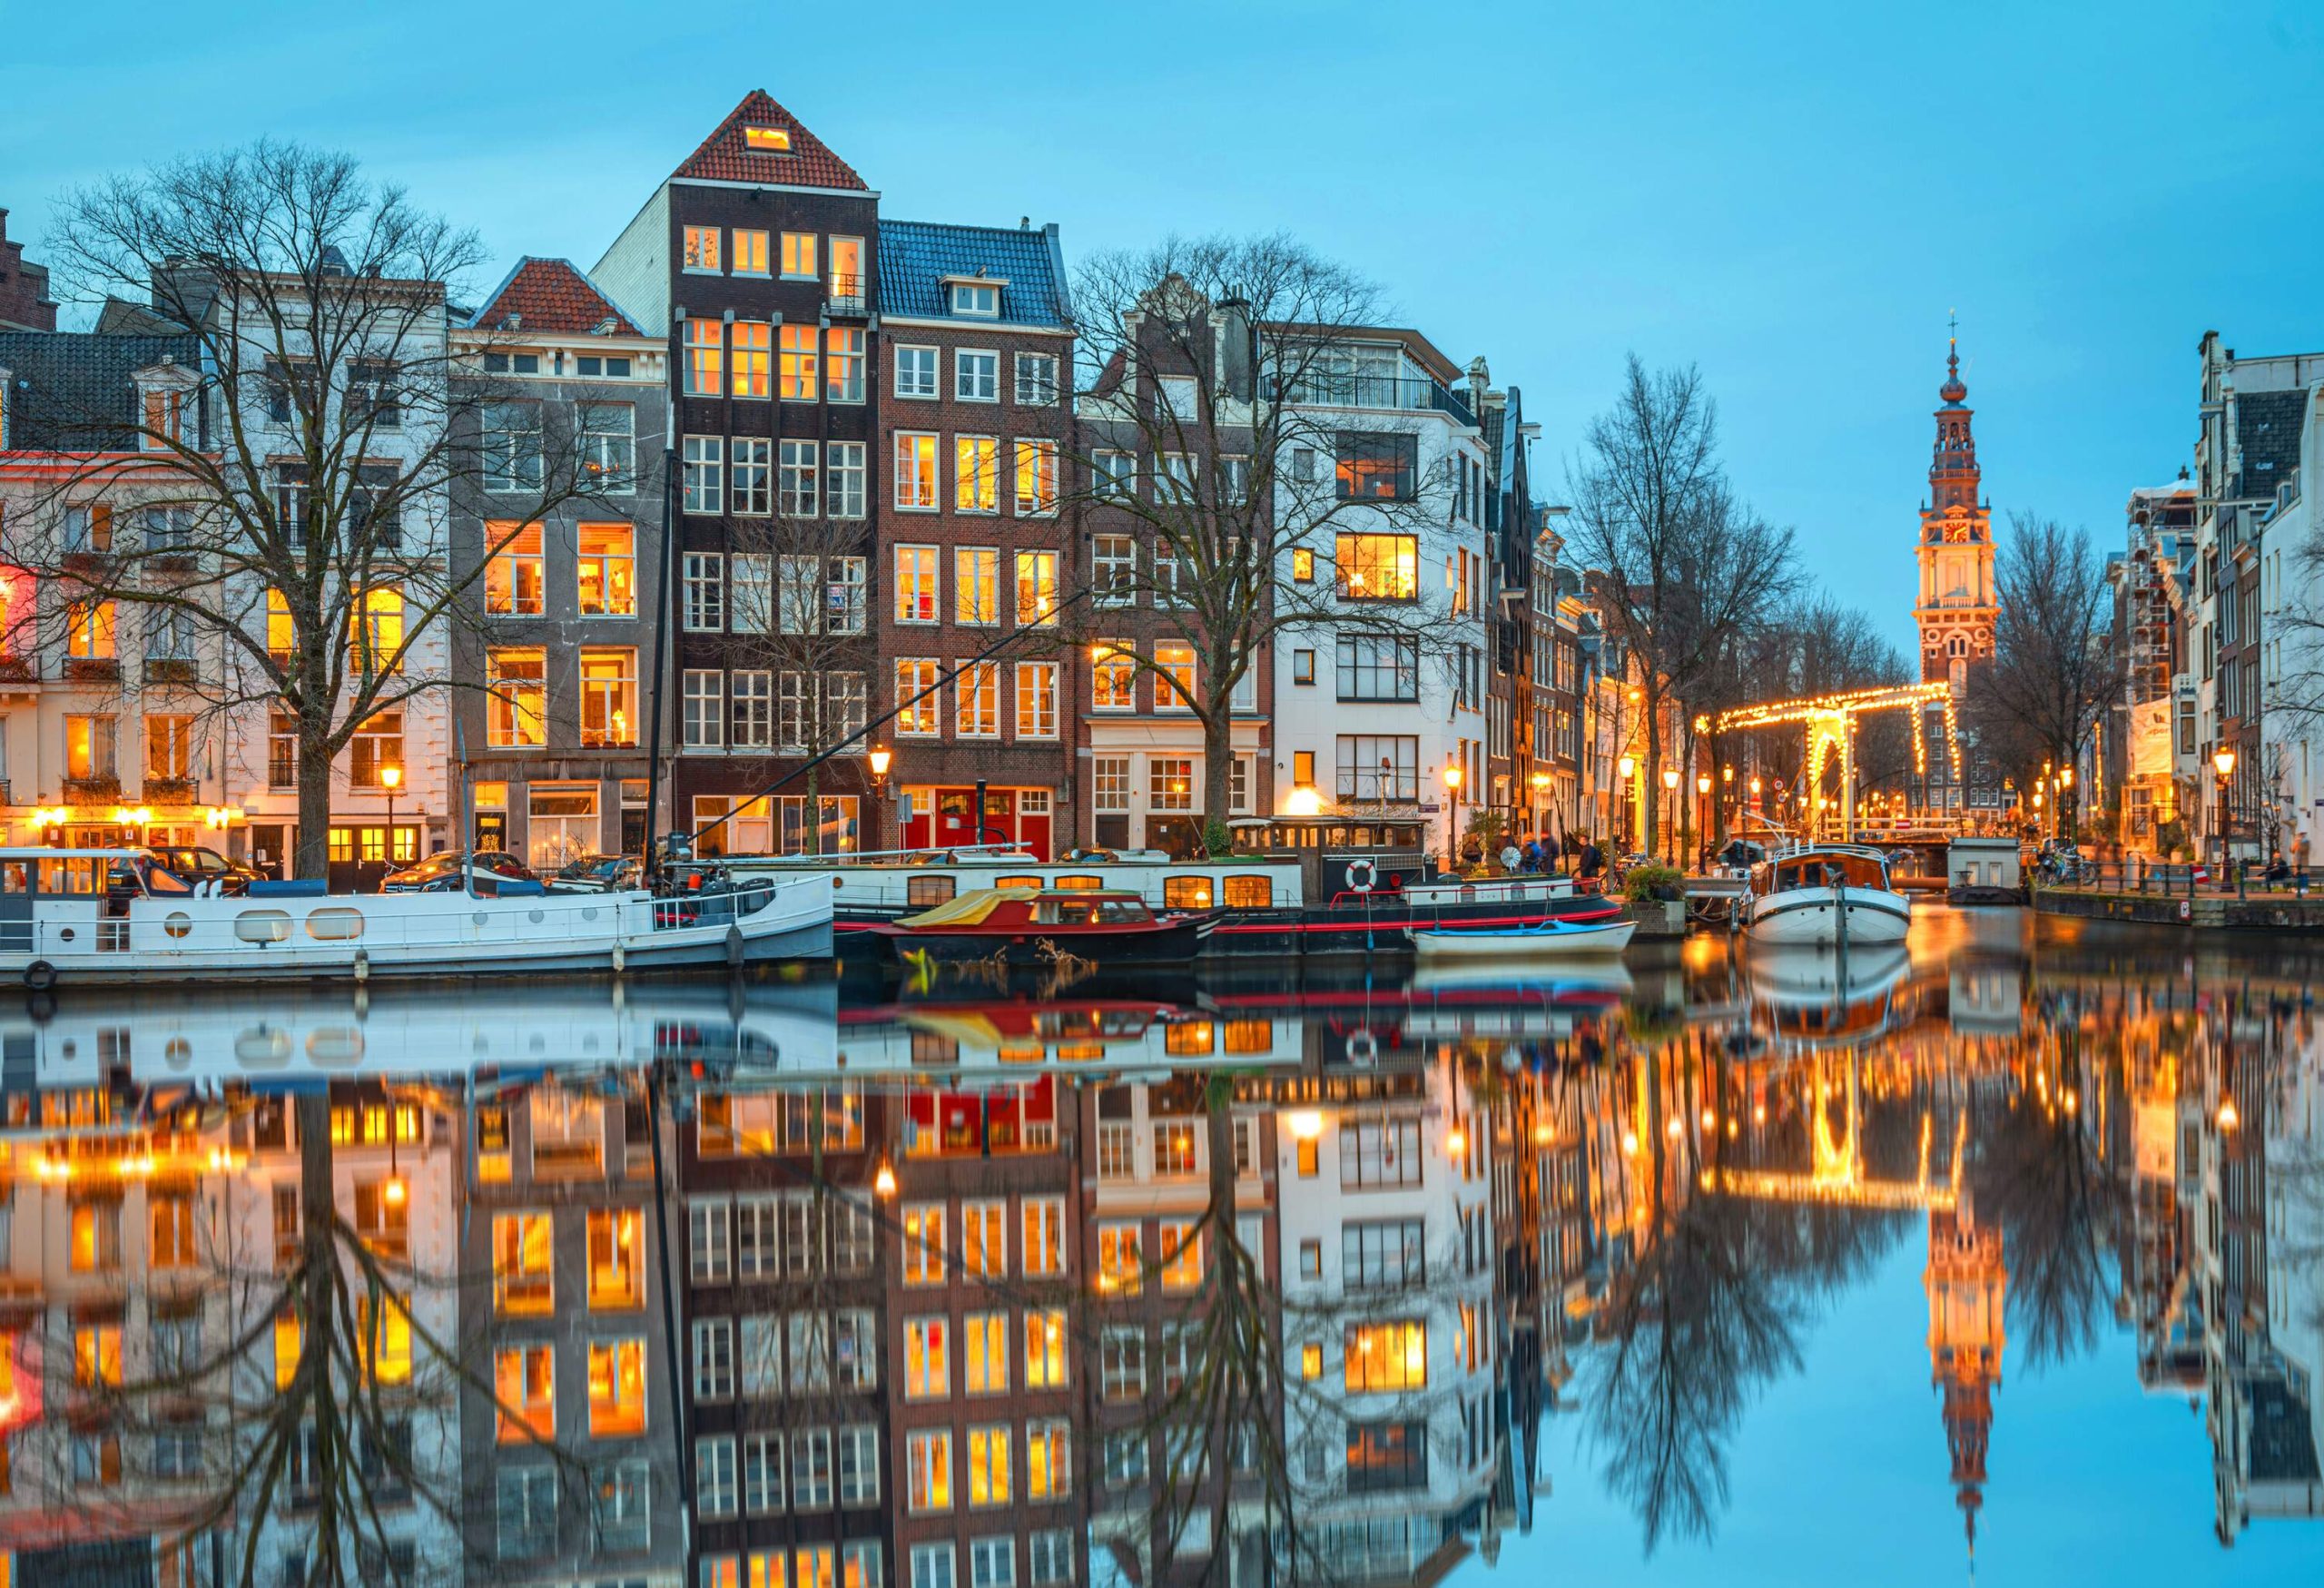 Amstel river at dusk. The city lights have just turned on giving a beautiful warm color to the beautiful buildings.